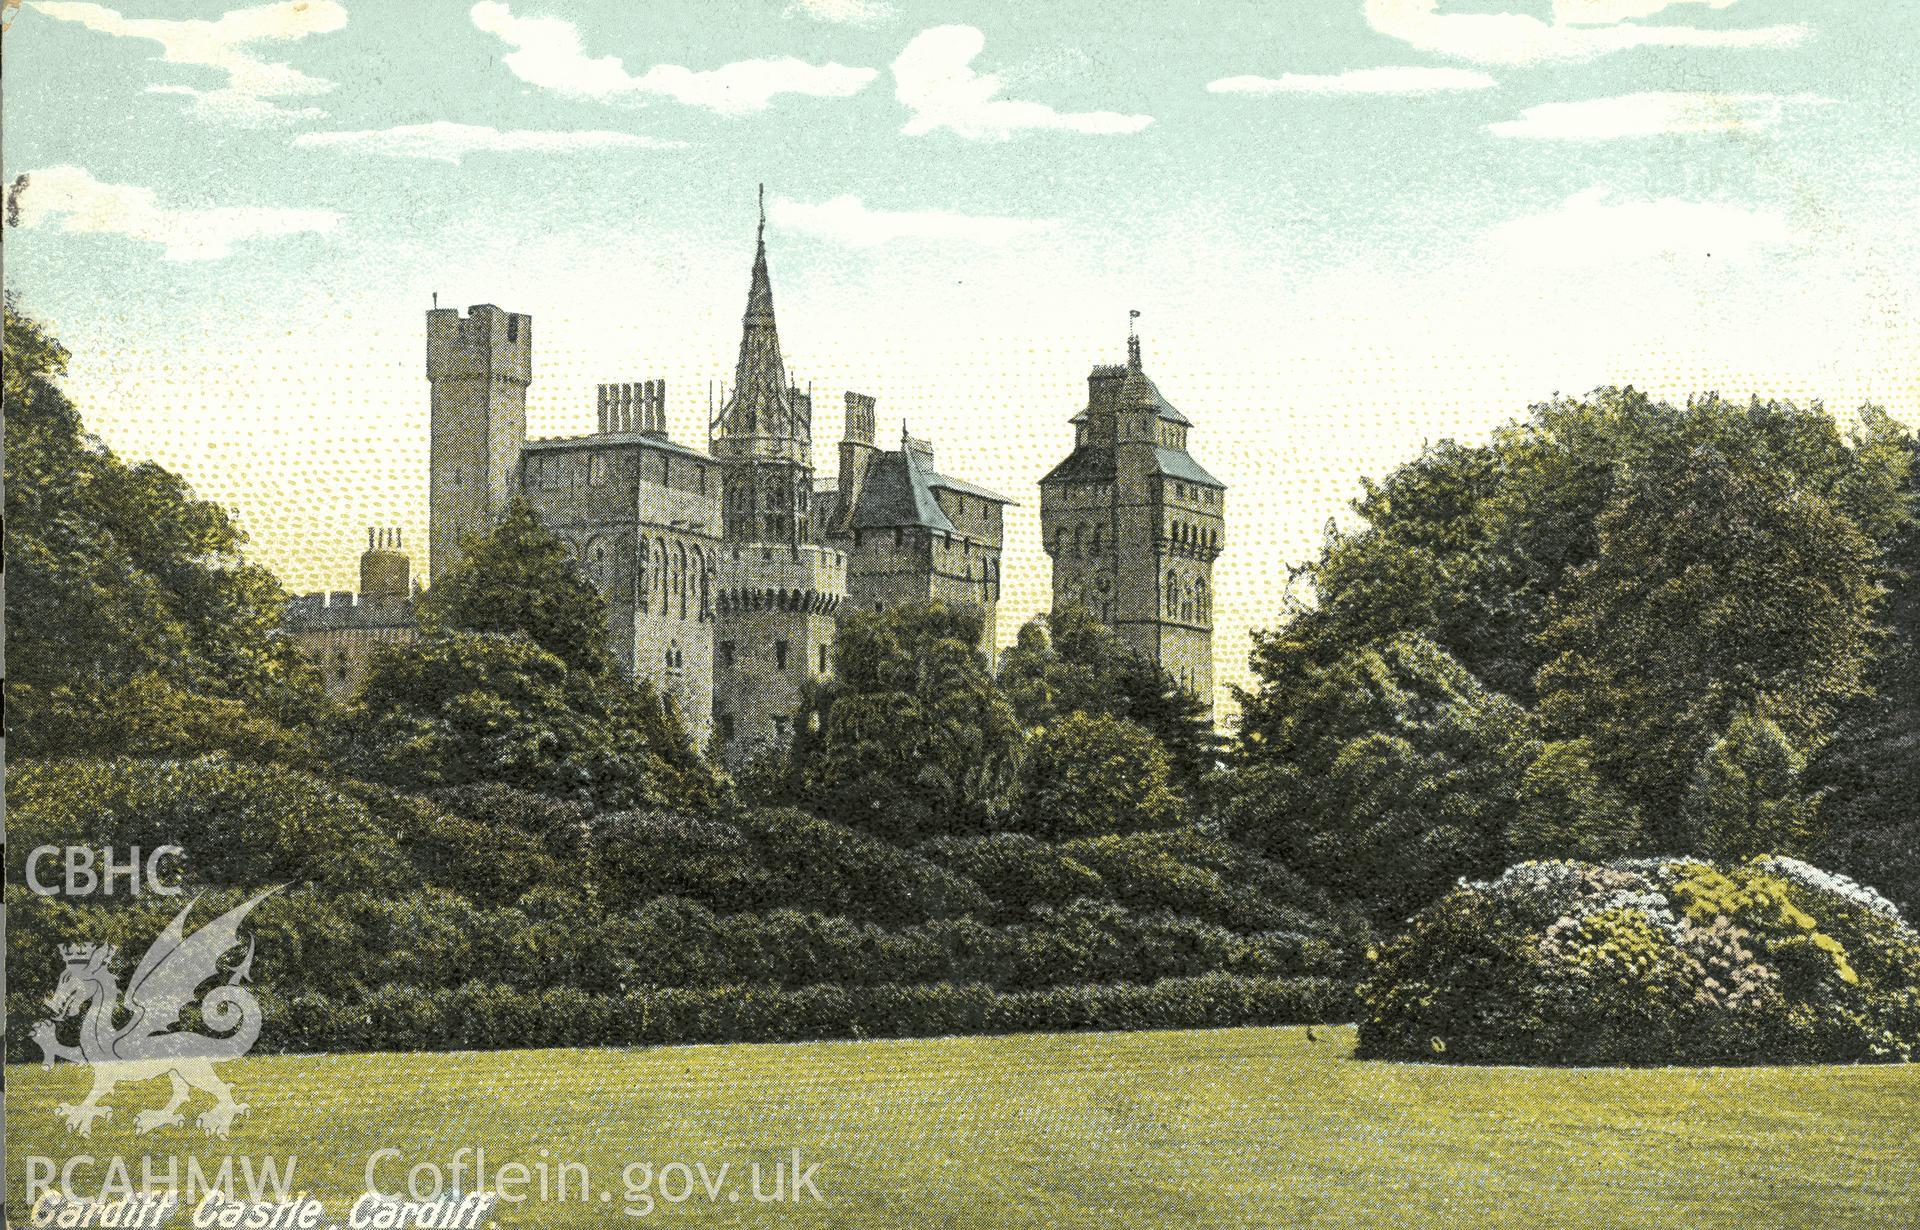 Digitised postcard image of Cardiff Castle, B.B. London Excelsior Series. Produced by Parks and Gardens Data Services, from an original item in the Peter Davis Collection at Parks and Gardens UK. We hold only web-resolution images of this collection, suitable for viewing on screen and for research purposes only. We do not hold the original images, or publication quality scans.